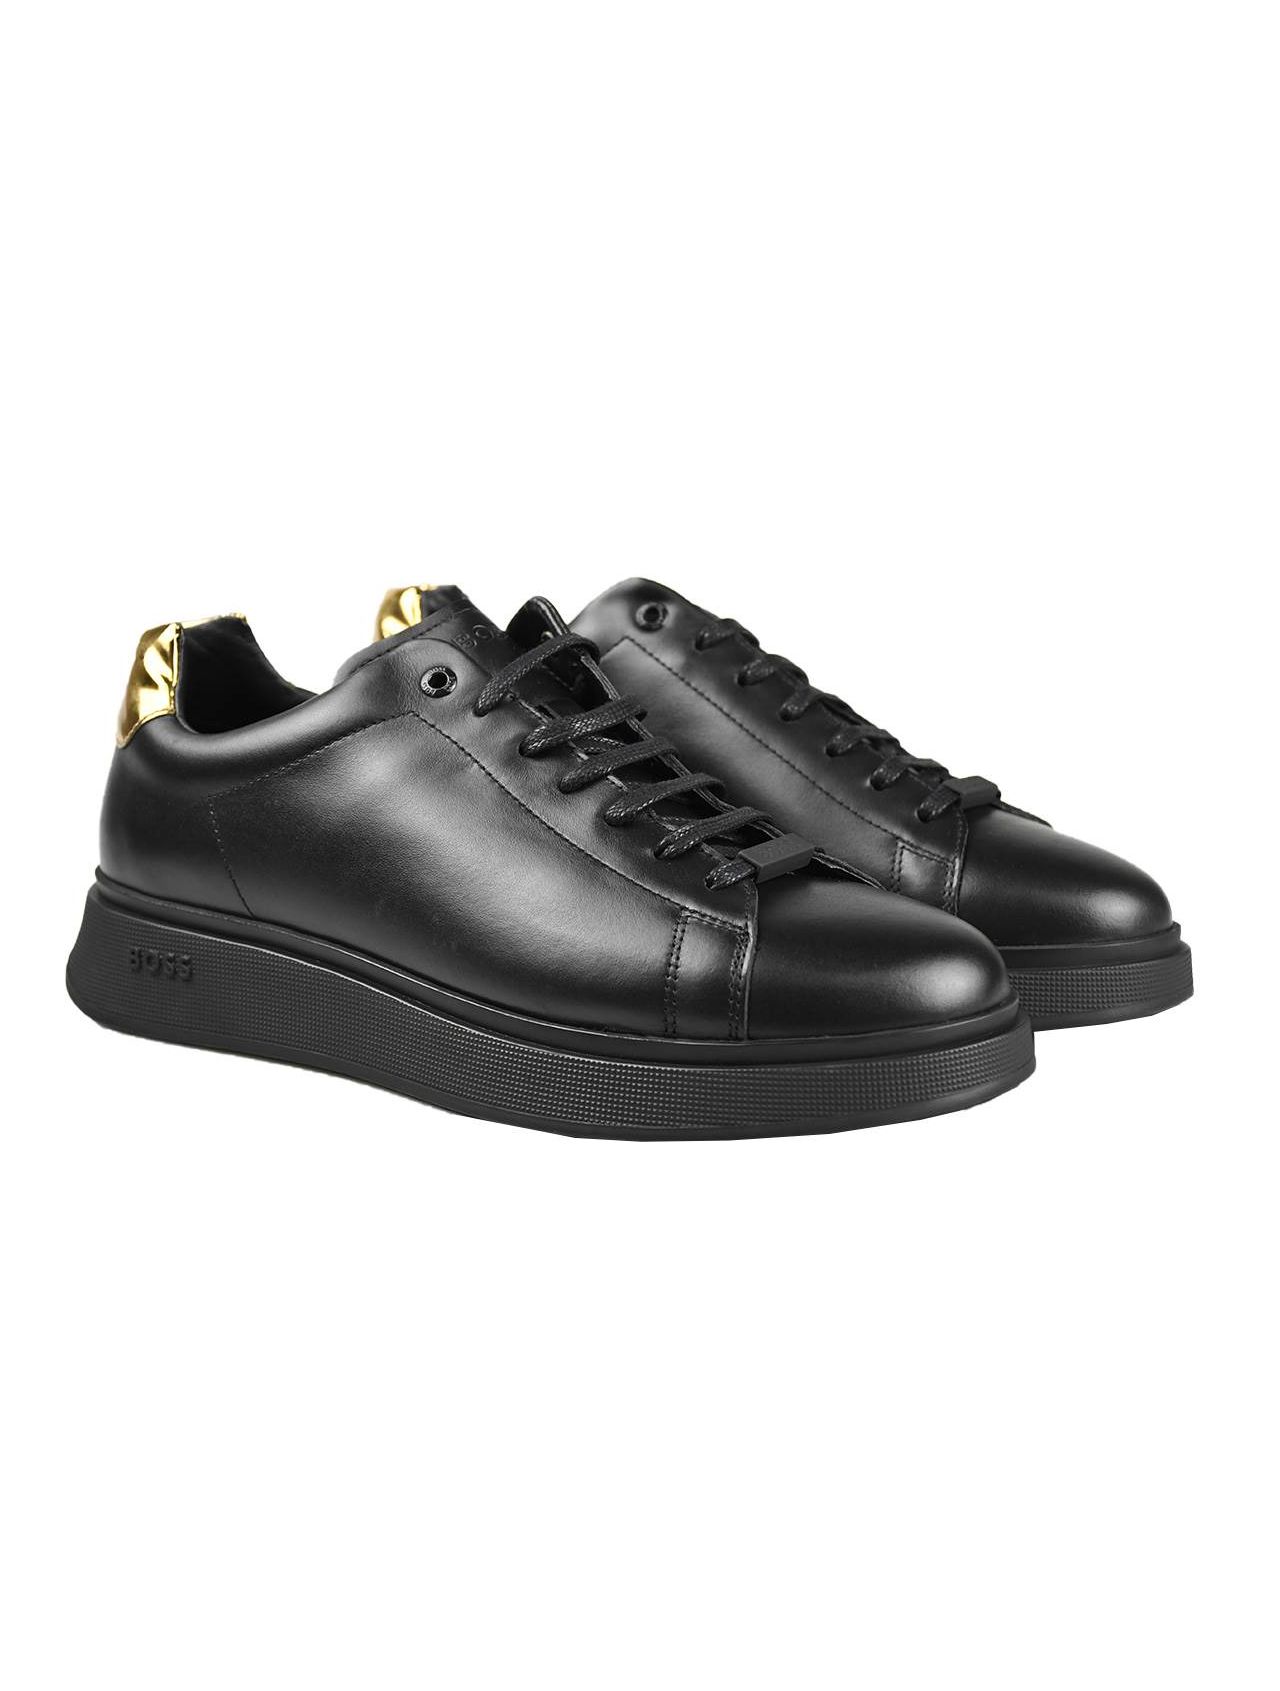 BOSS Zayn Low-top Trainers In Perforated Leather in Black for Men | Lyst